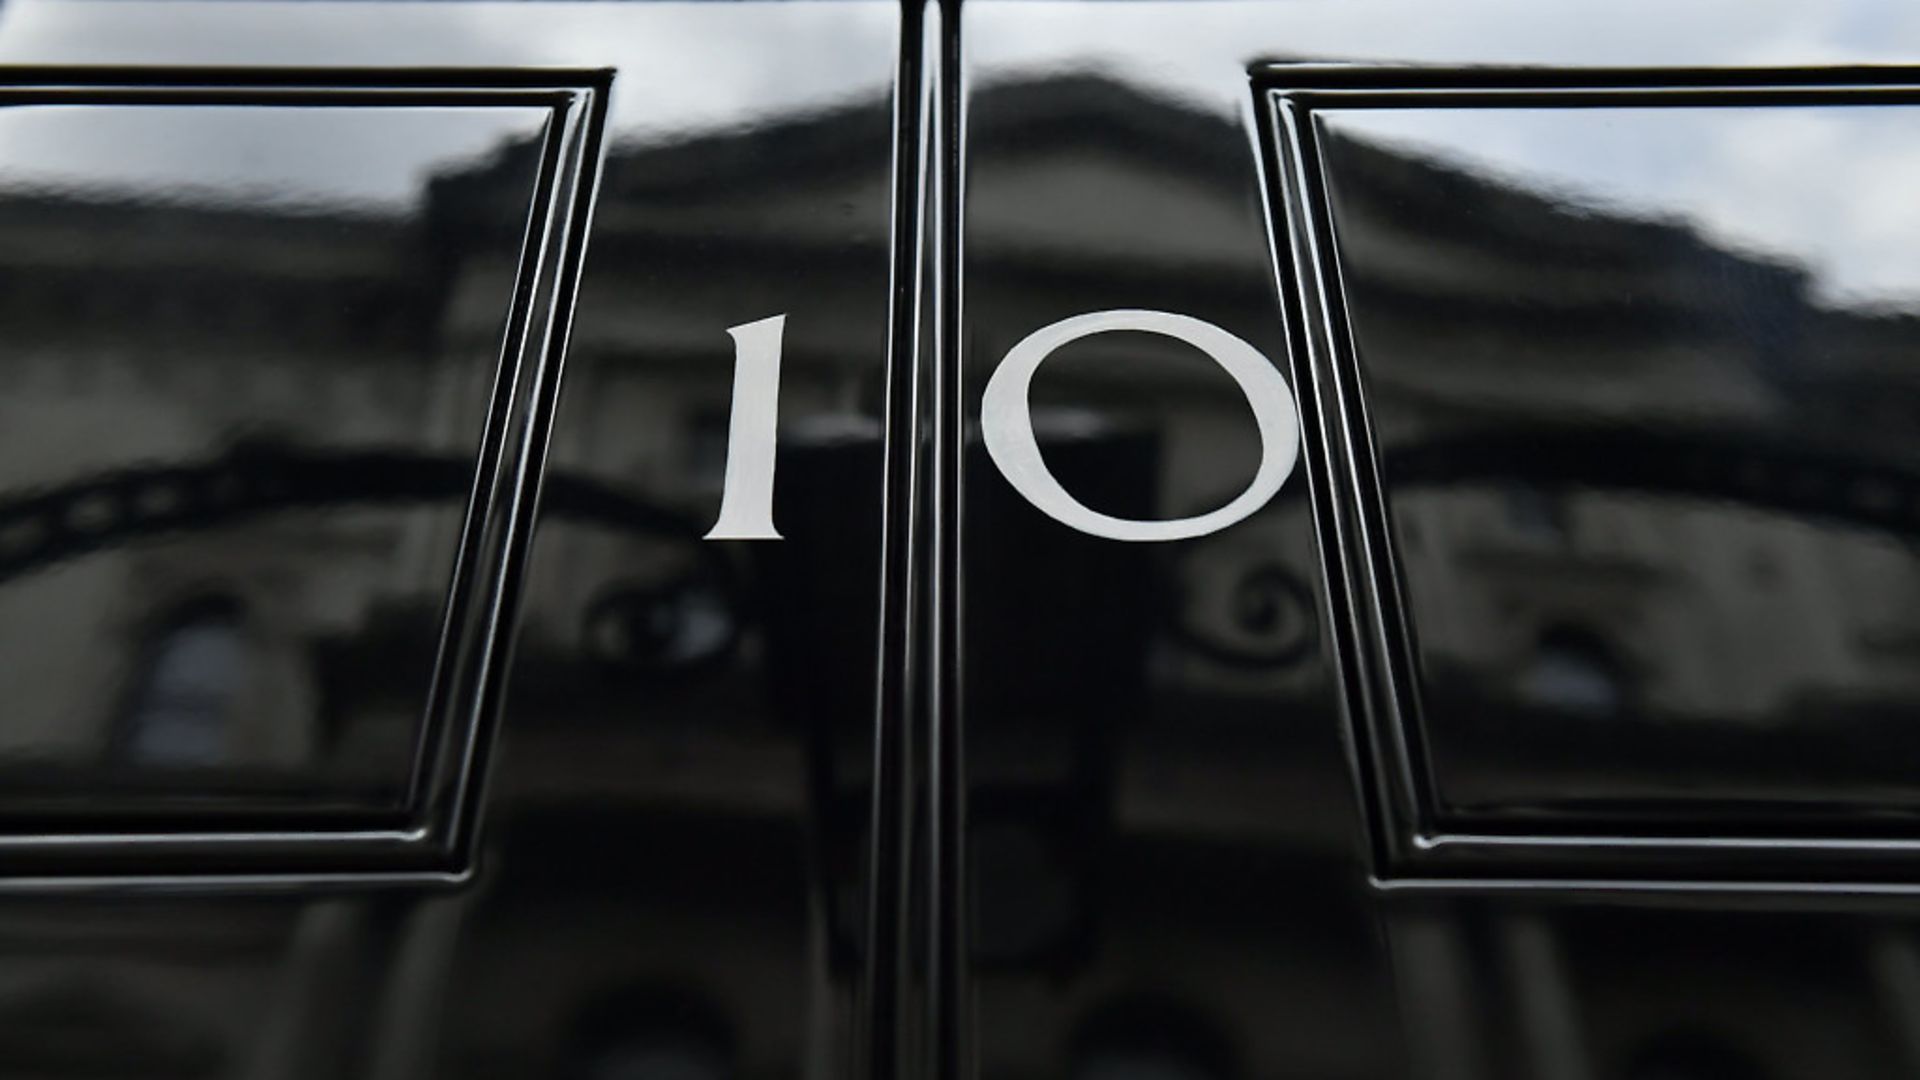 The front door of number 10 Downing Street in London. - Credit: PA